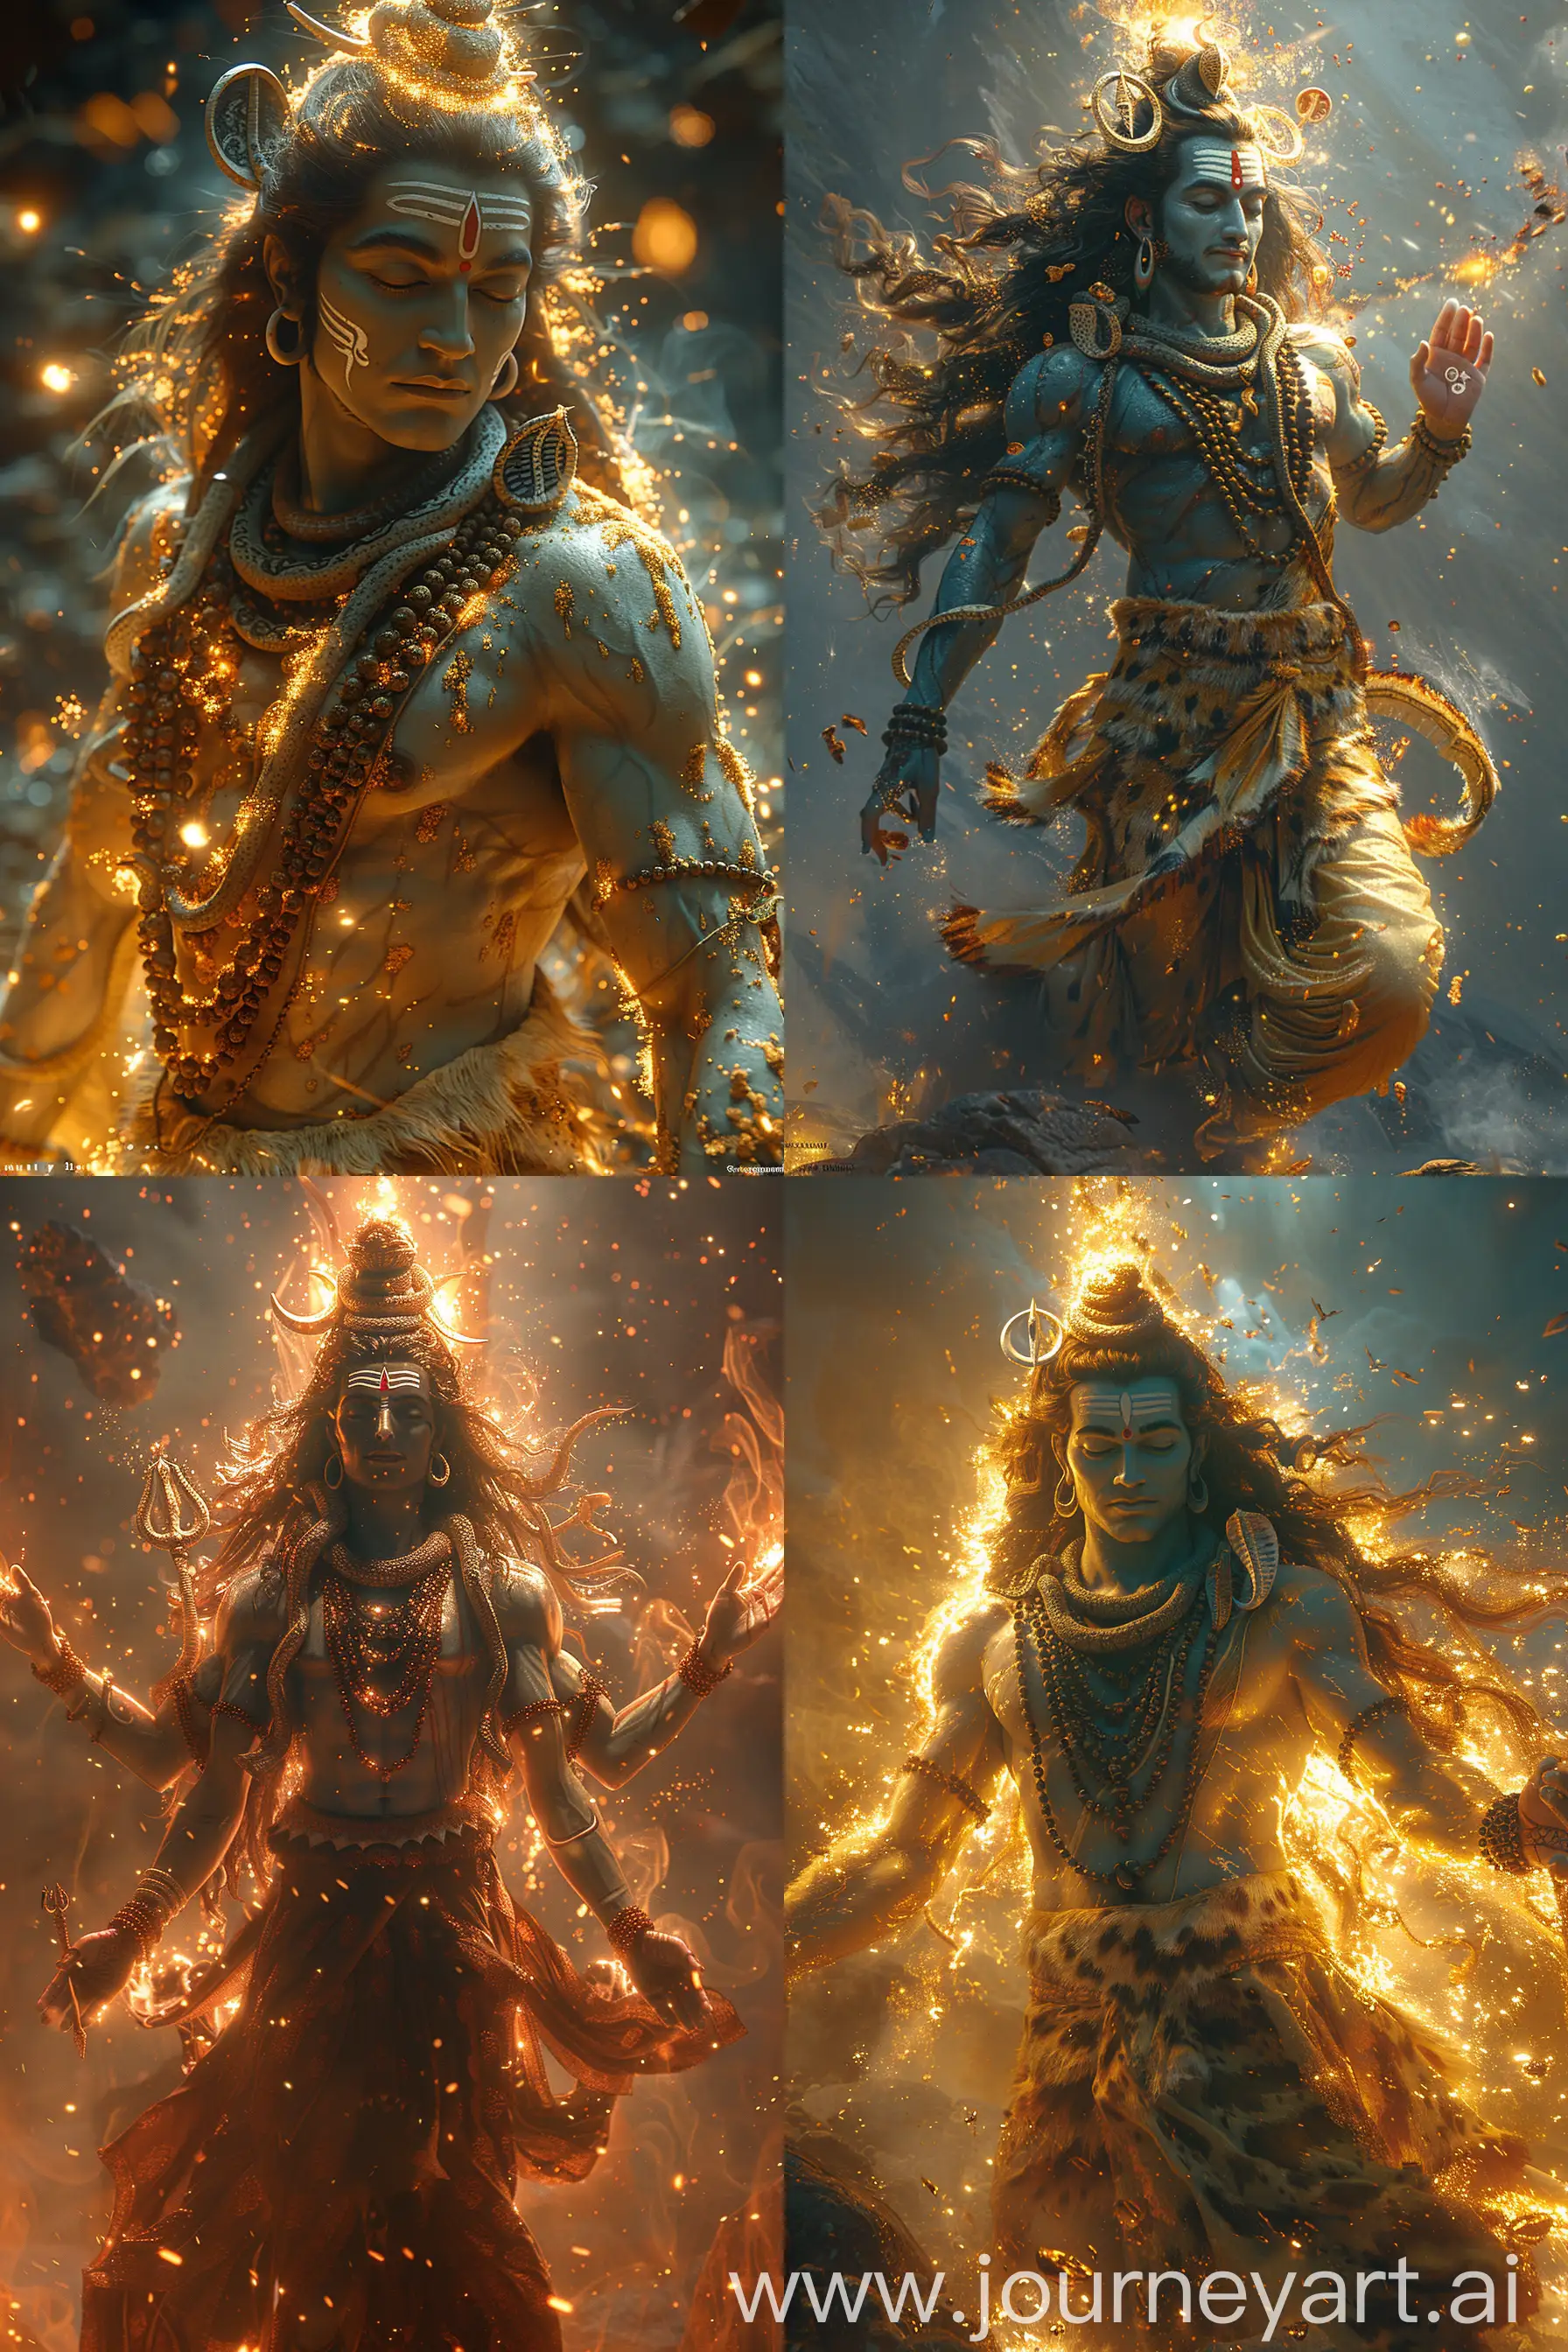 Mystical-Depiction-of-Lord-Shiva-in-Cosmic-Dance-of-Creation-and-Destruction